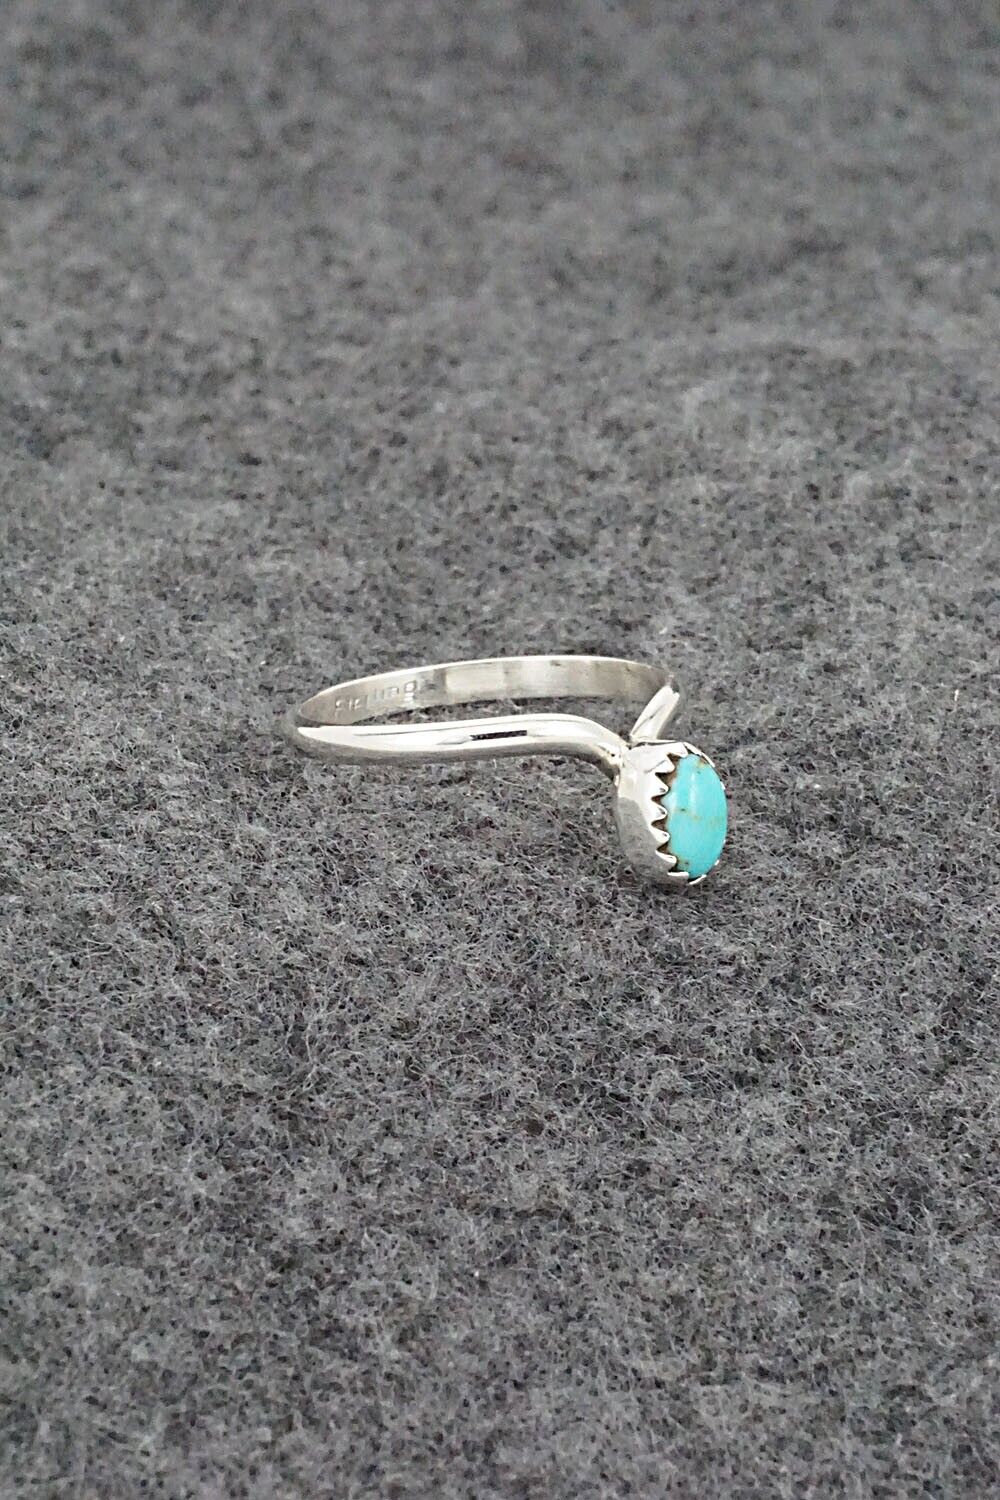 Turquoise & Sterling Silver Ring - Hiram Largo - Size 6.75